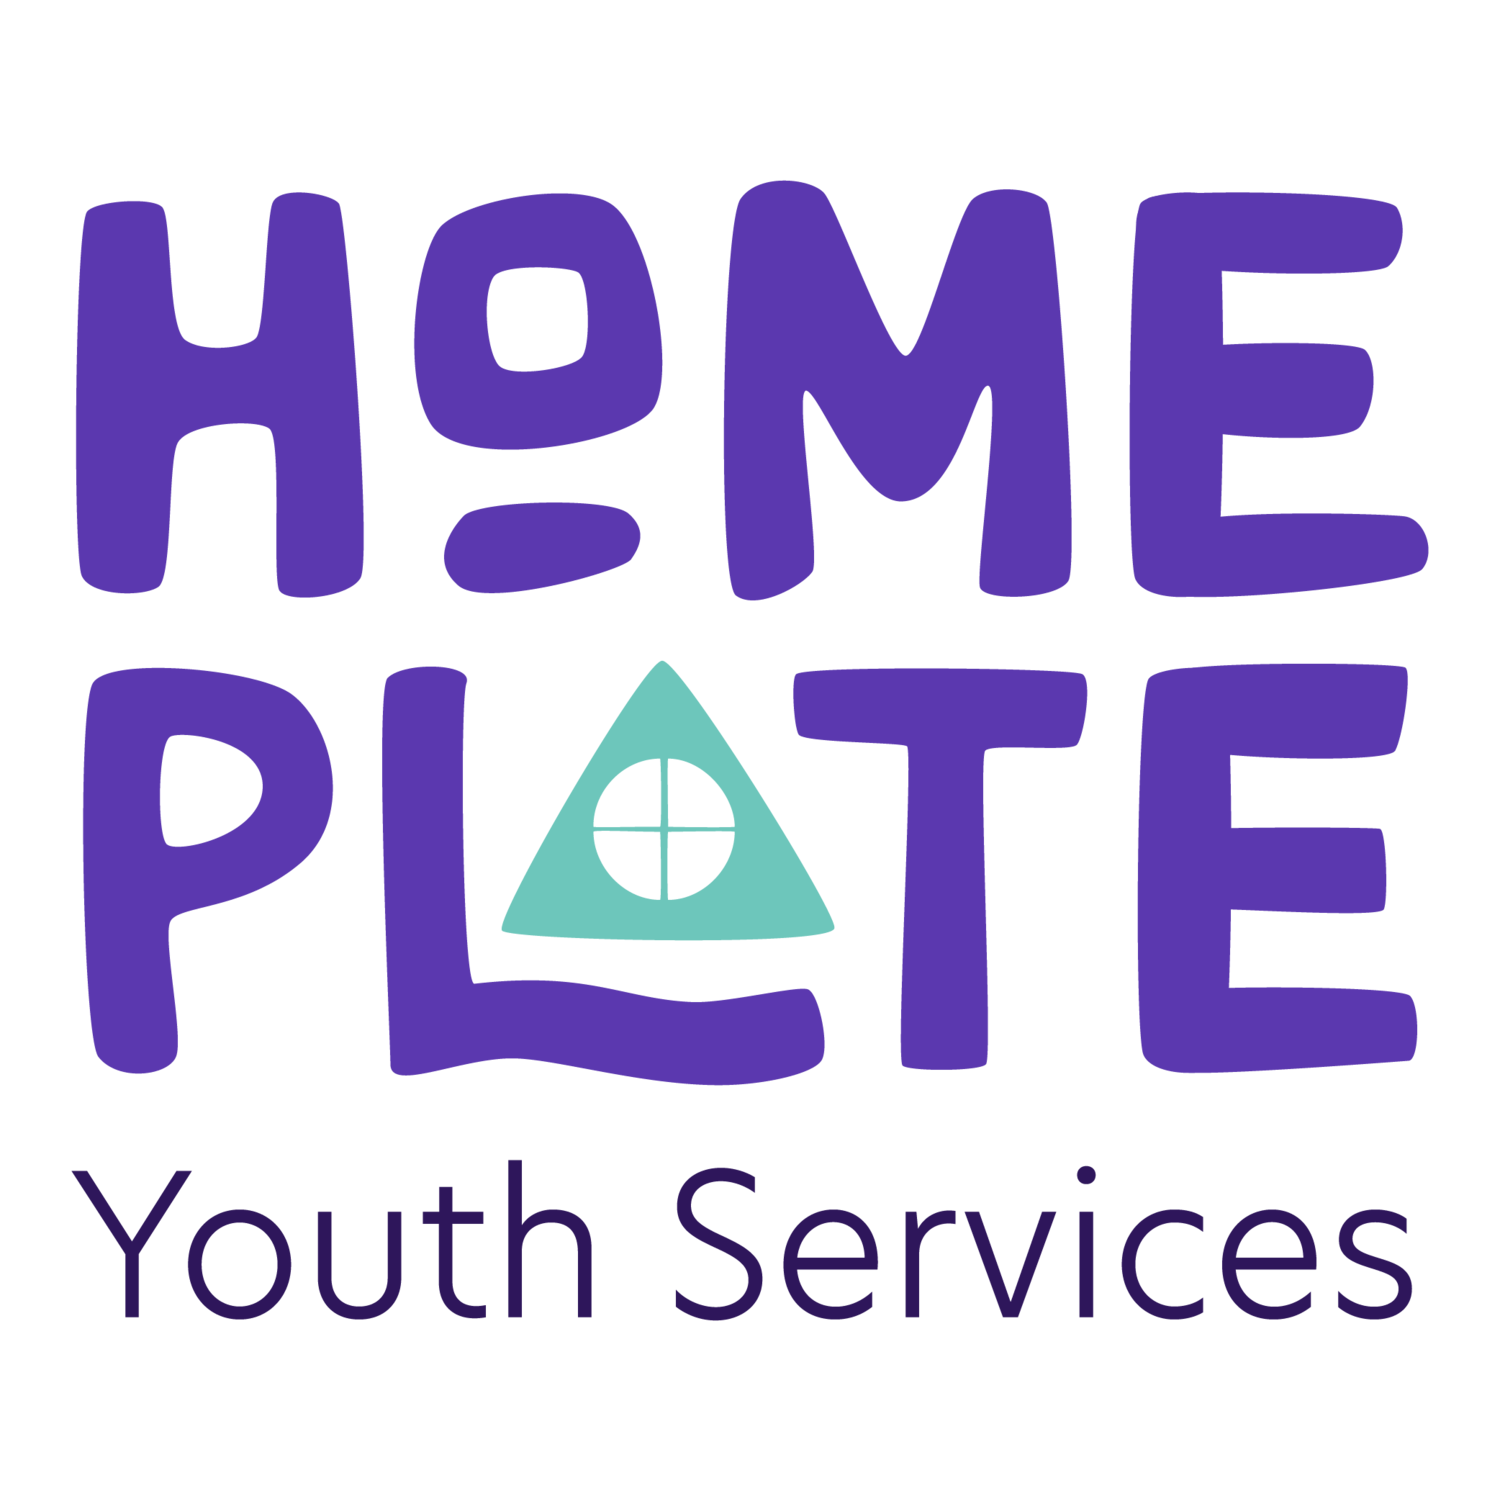 HomePlate Youth Services